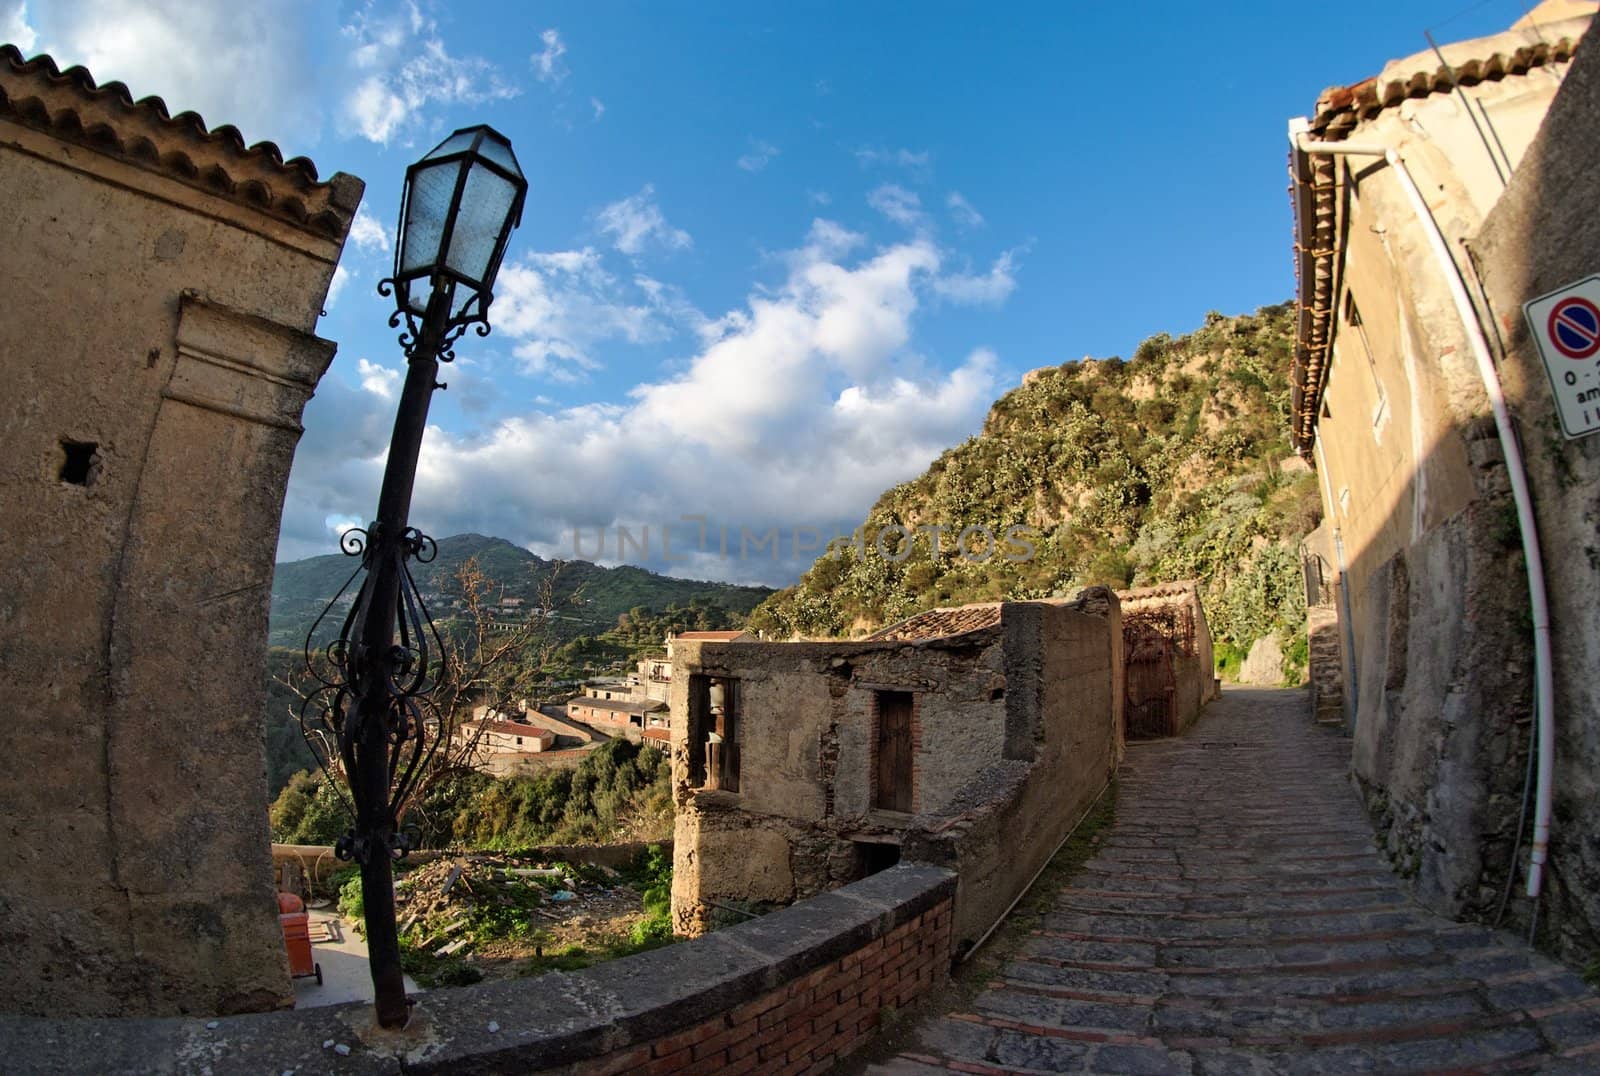 Fisheye view of medieval village of Savoca in Sicily, Italy, at sunset